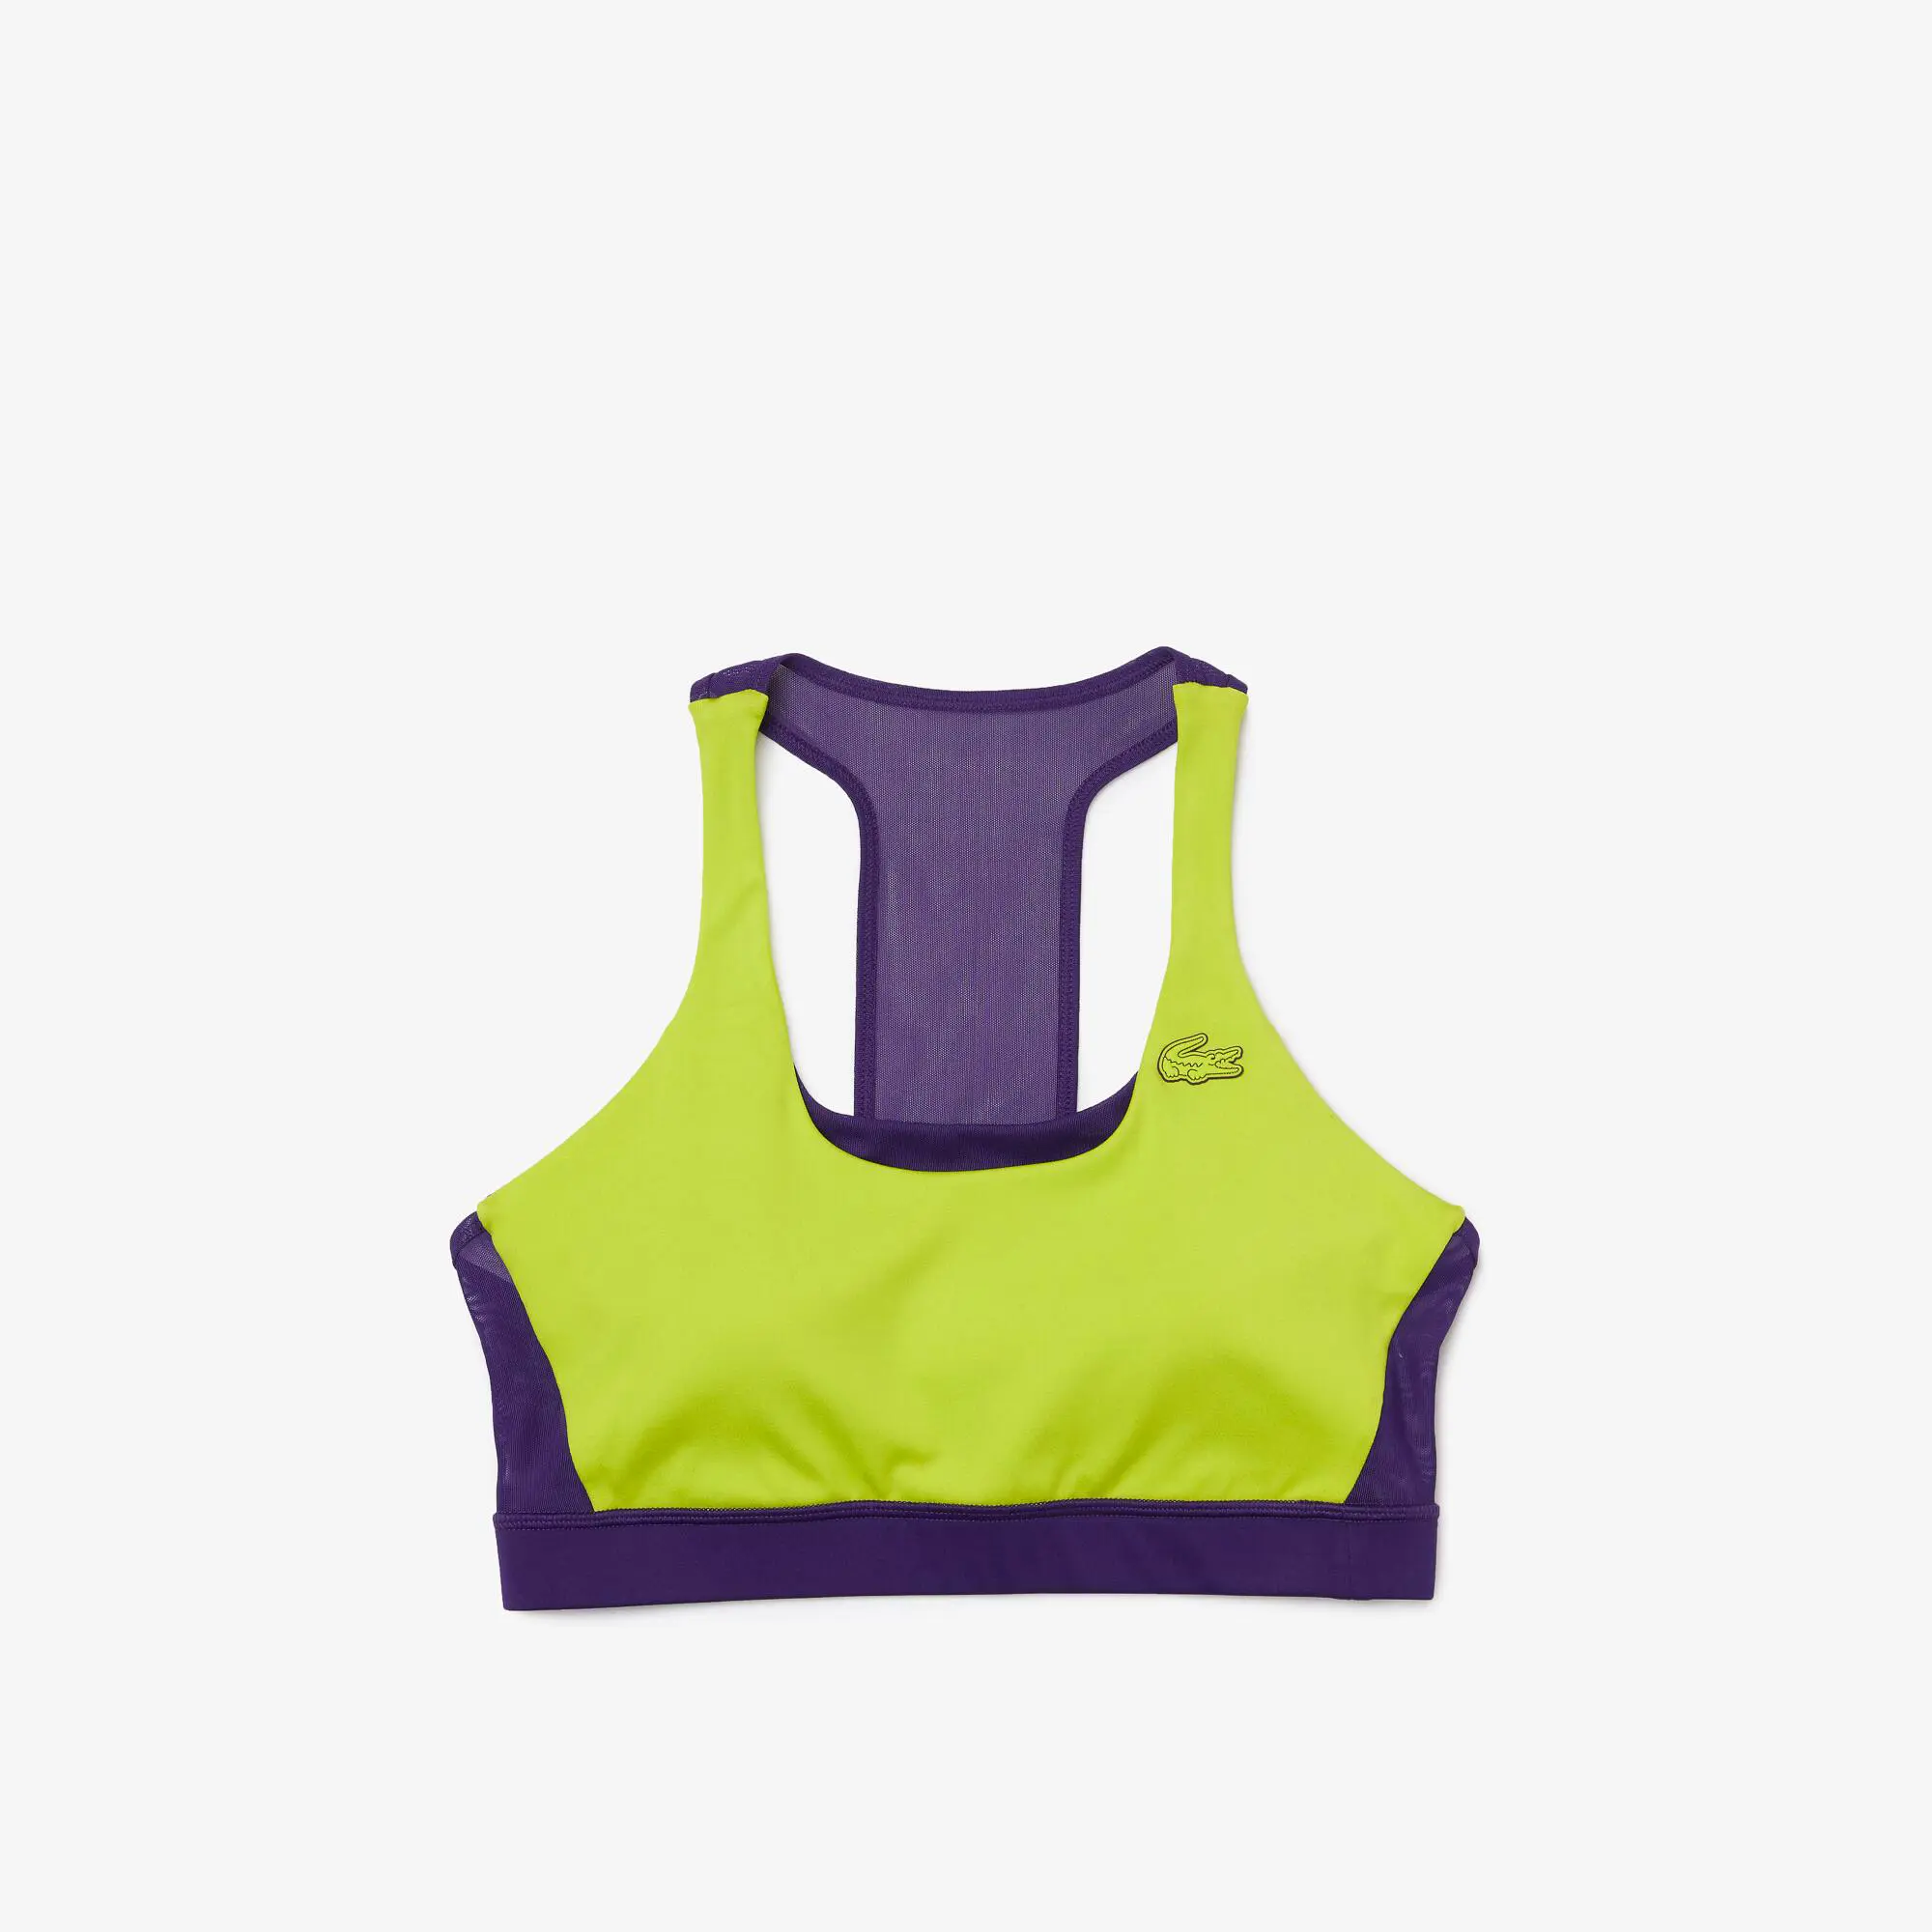 Lacoste Women's Lacoste SPORT Colour-Block Recycled Polyester Sports Bra. 2